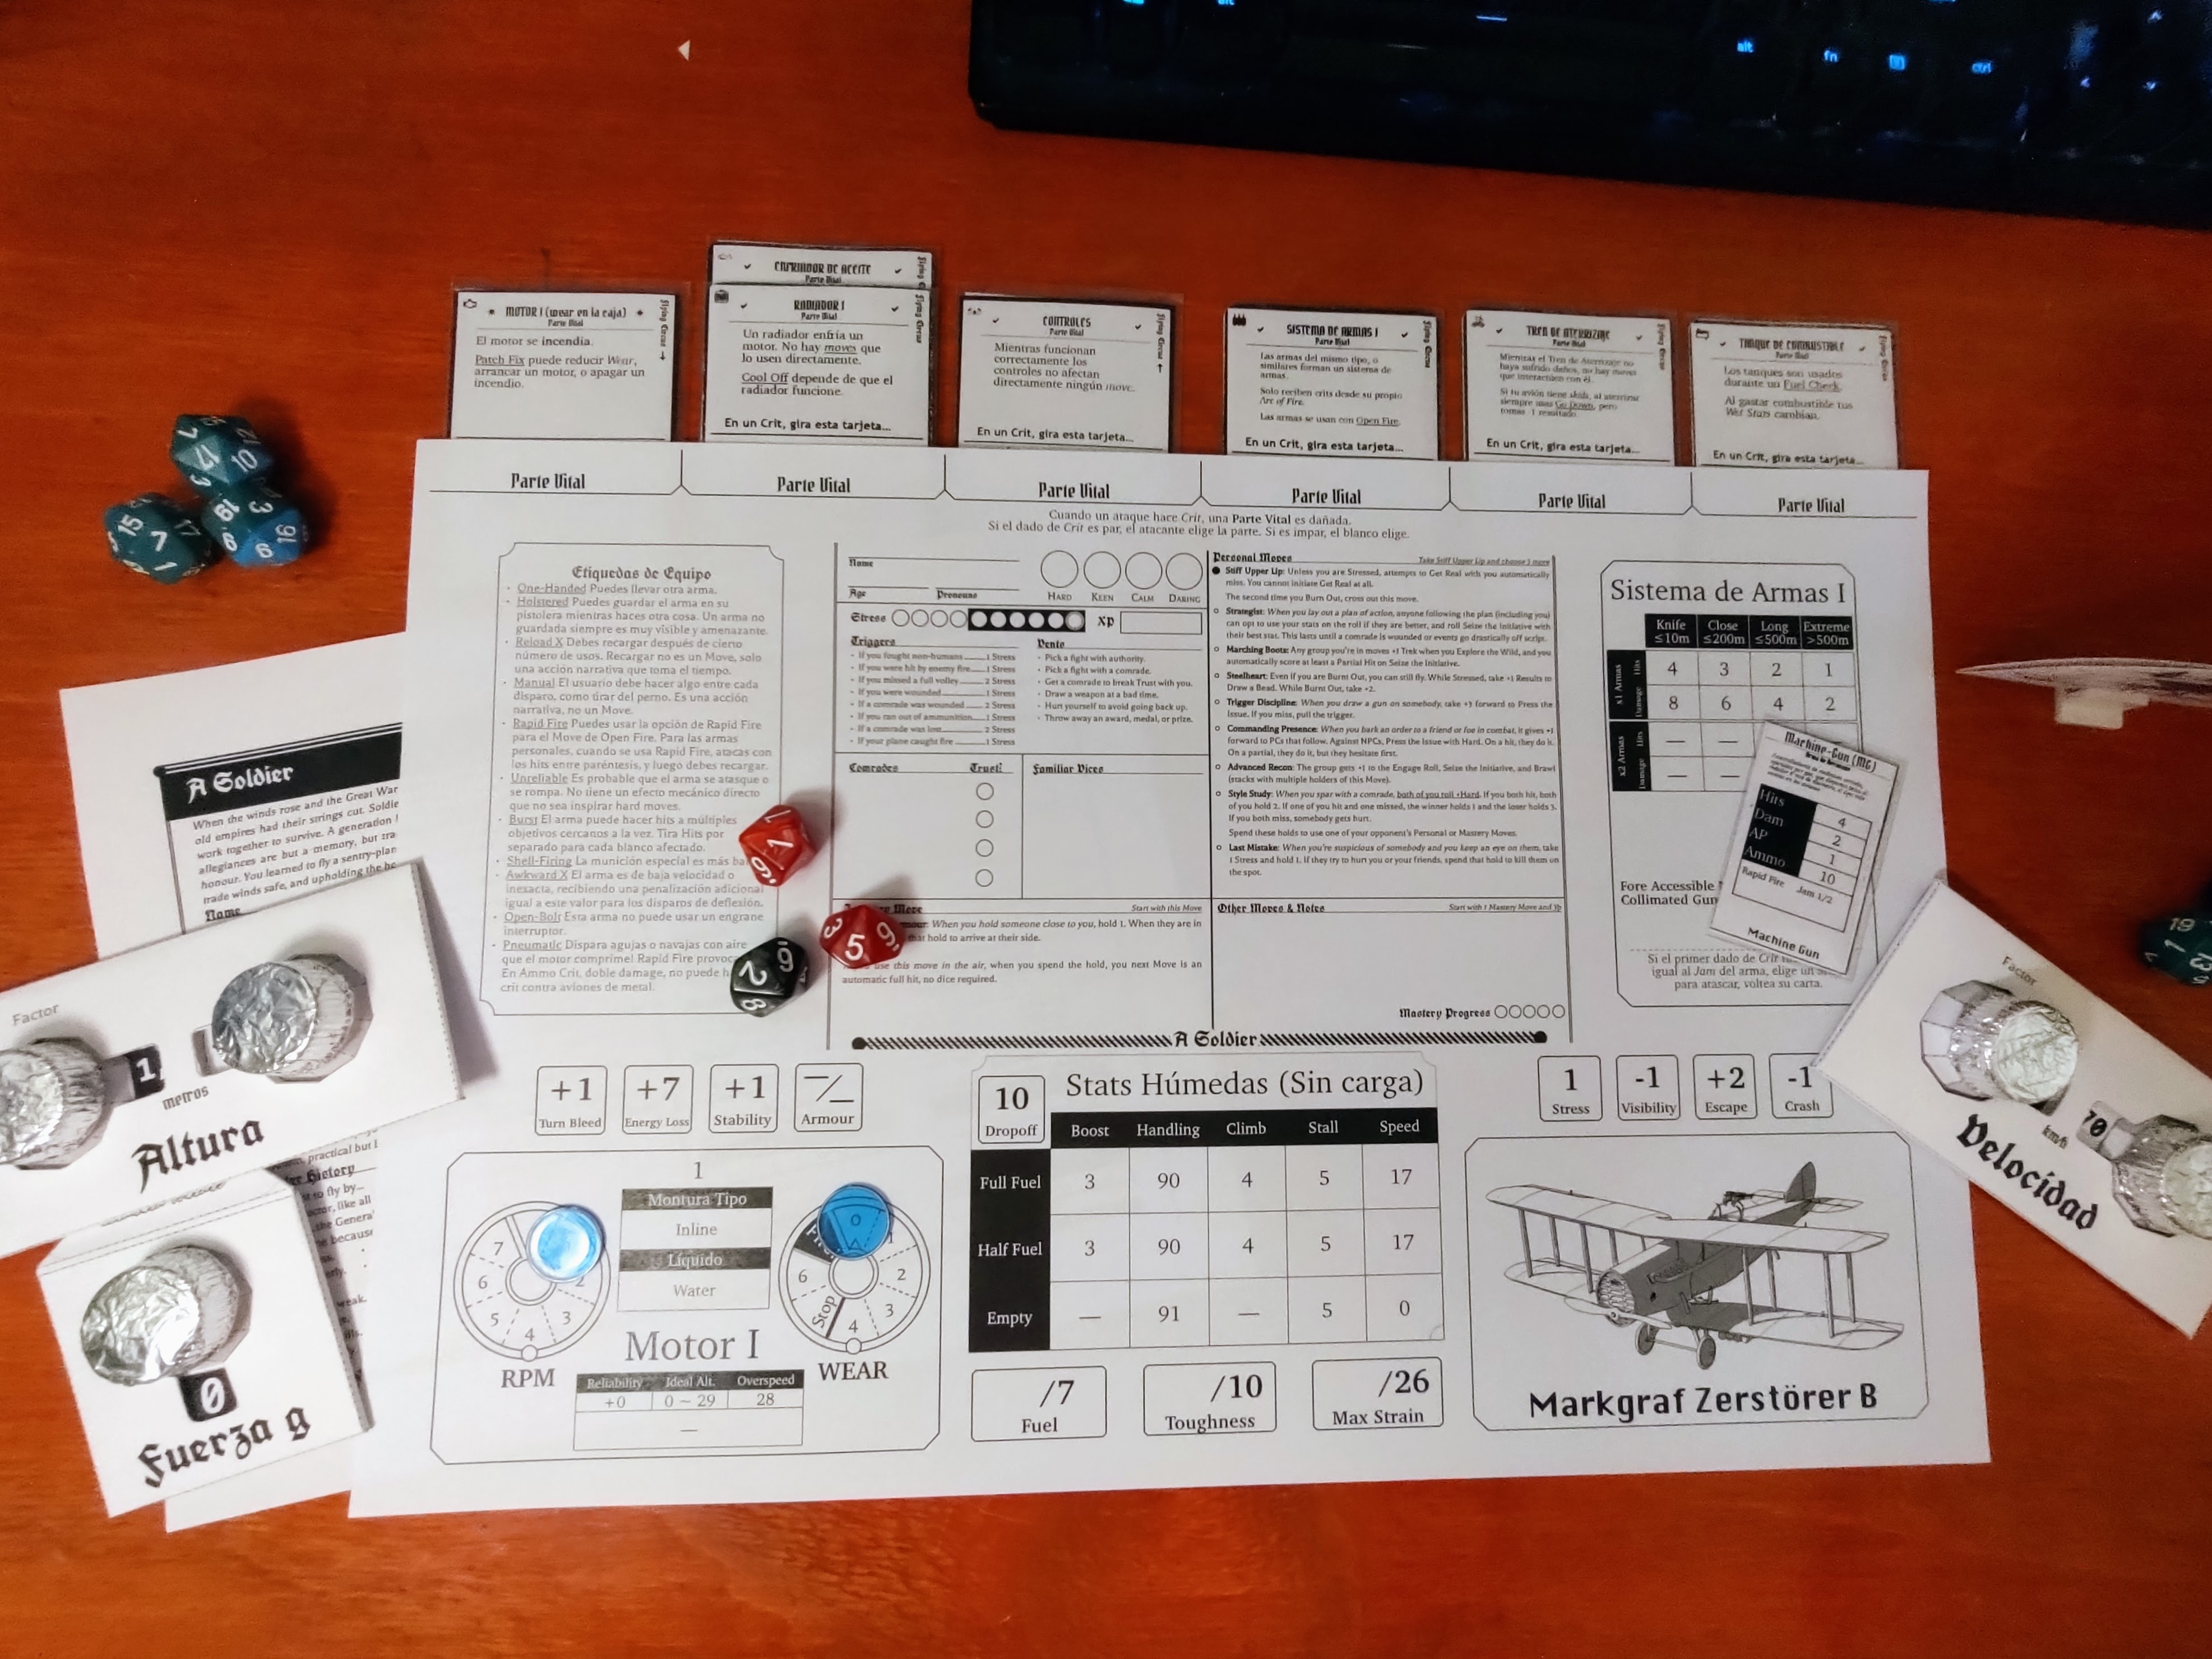 A set of dials, dice, cards and a larger plane dashboard